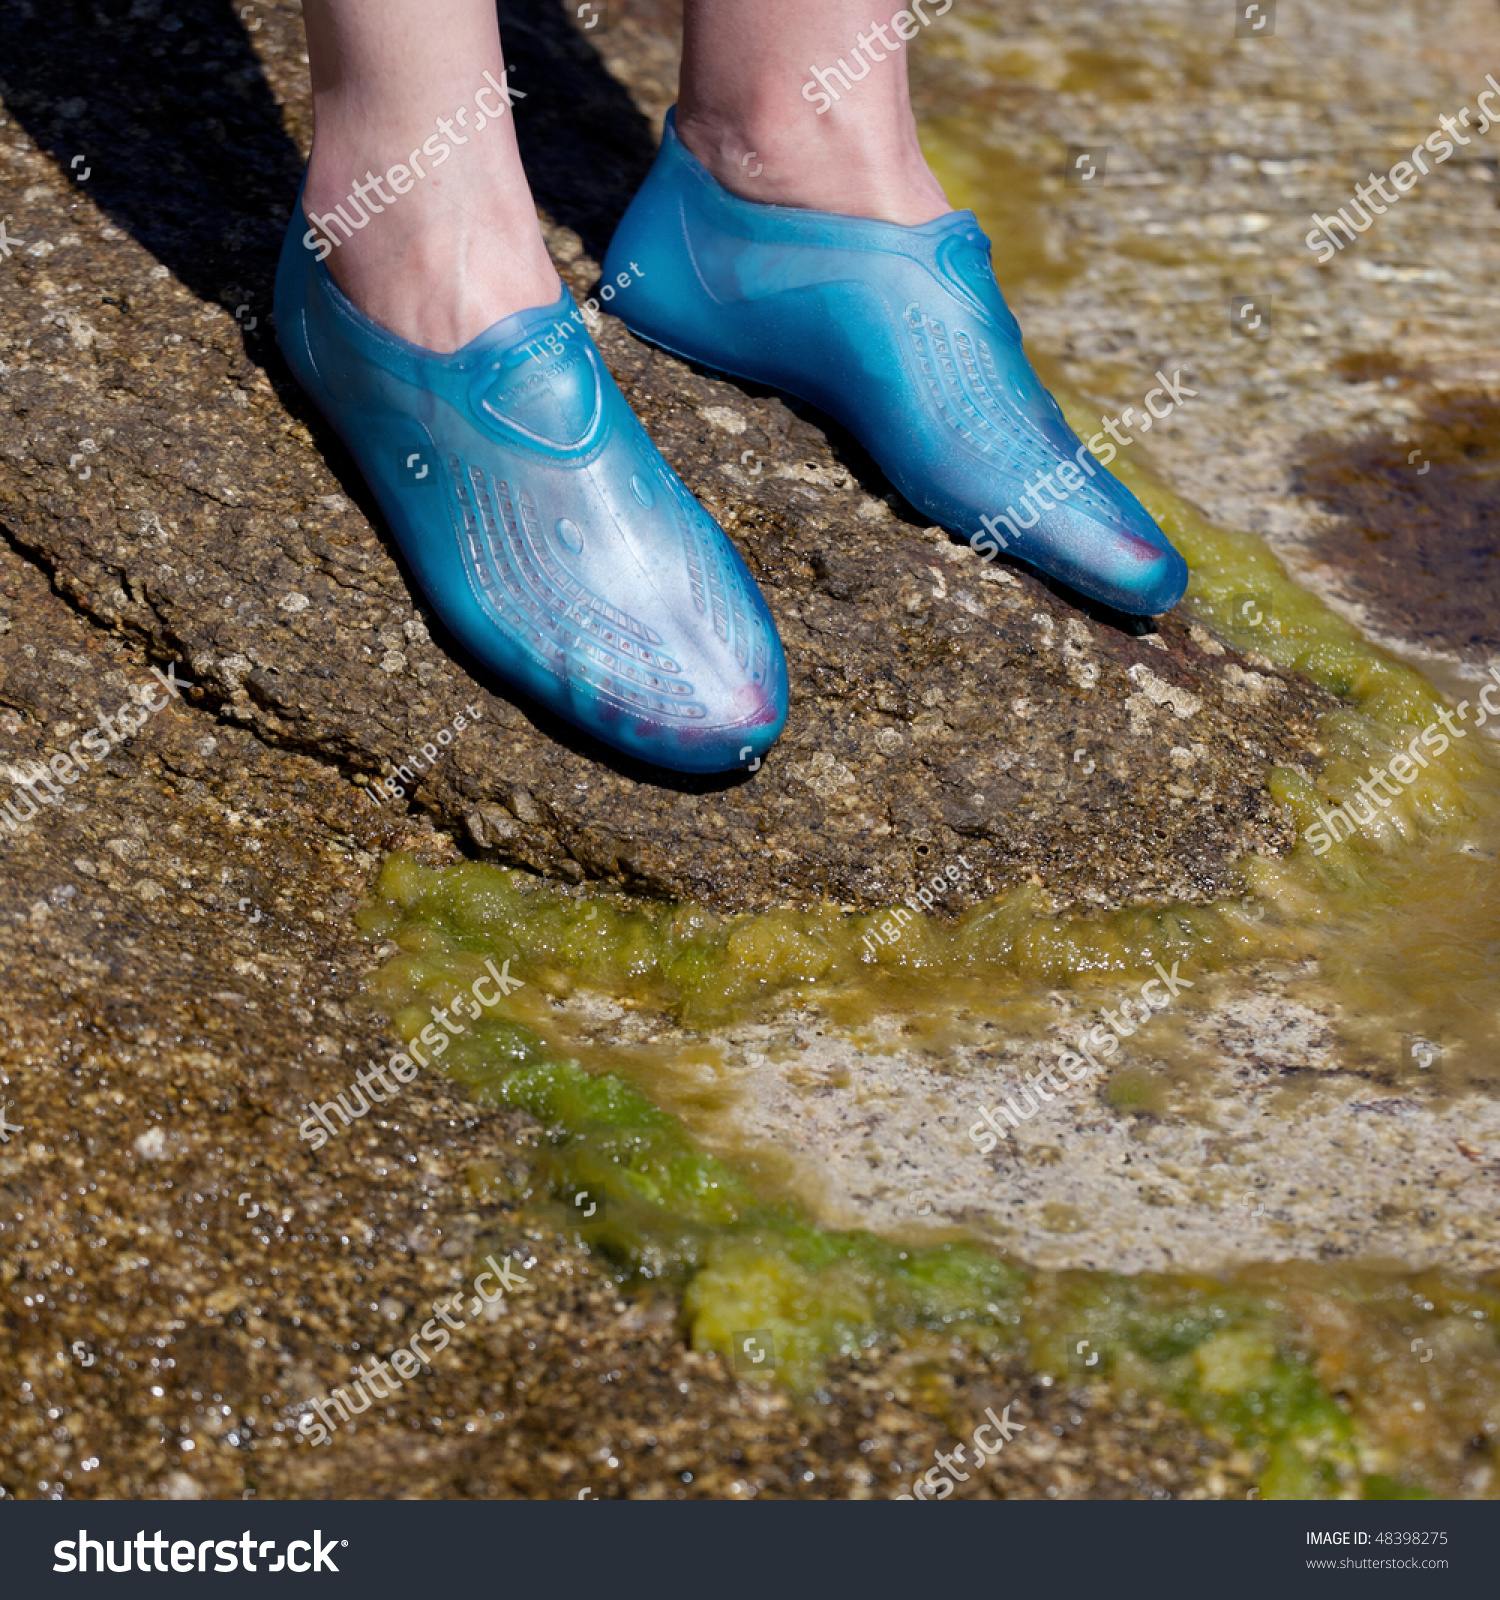 shoes to wear on rocky beaches